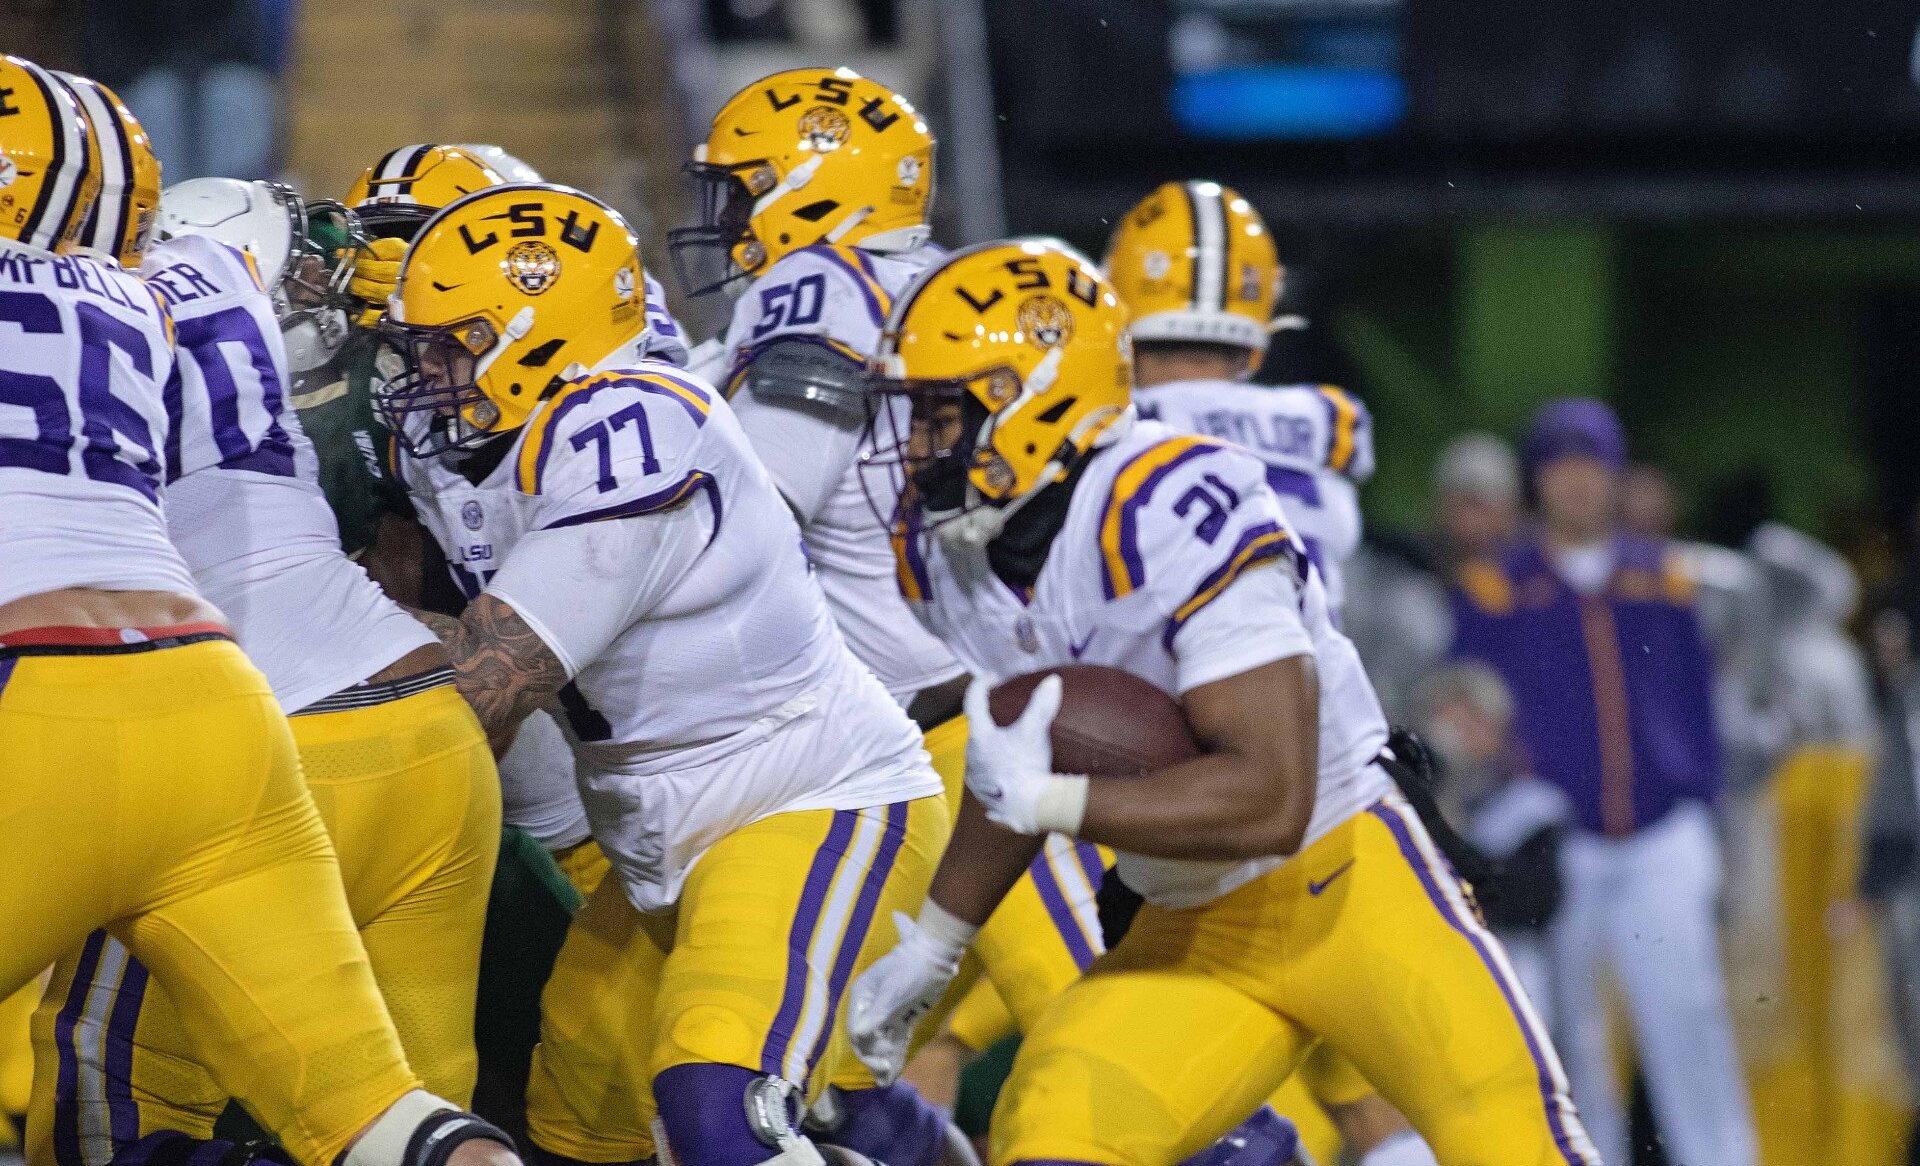 LSU’s Five Rushing Touchdowns Blazes Past UAB To 41-10 Victory